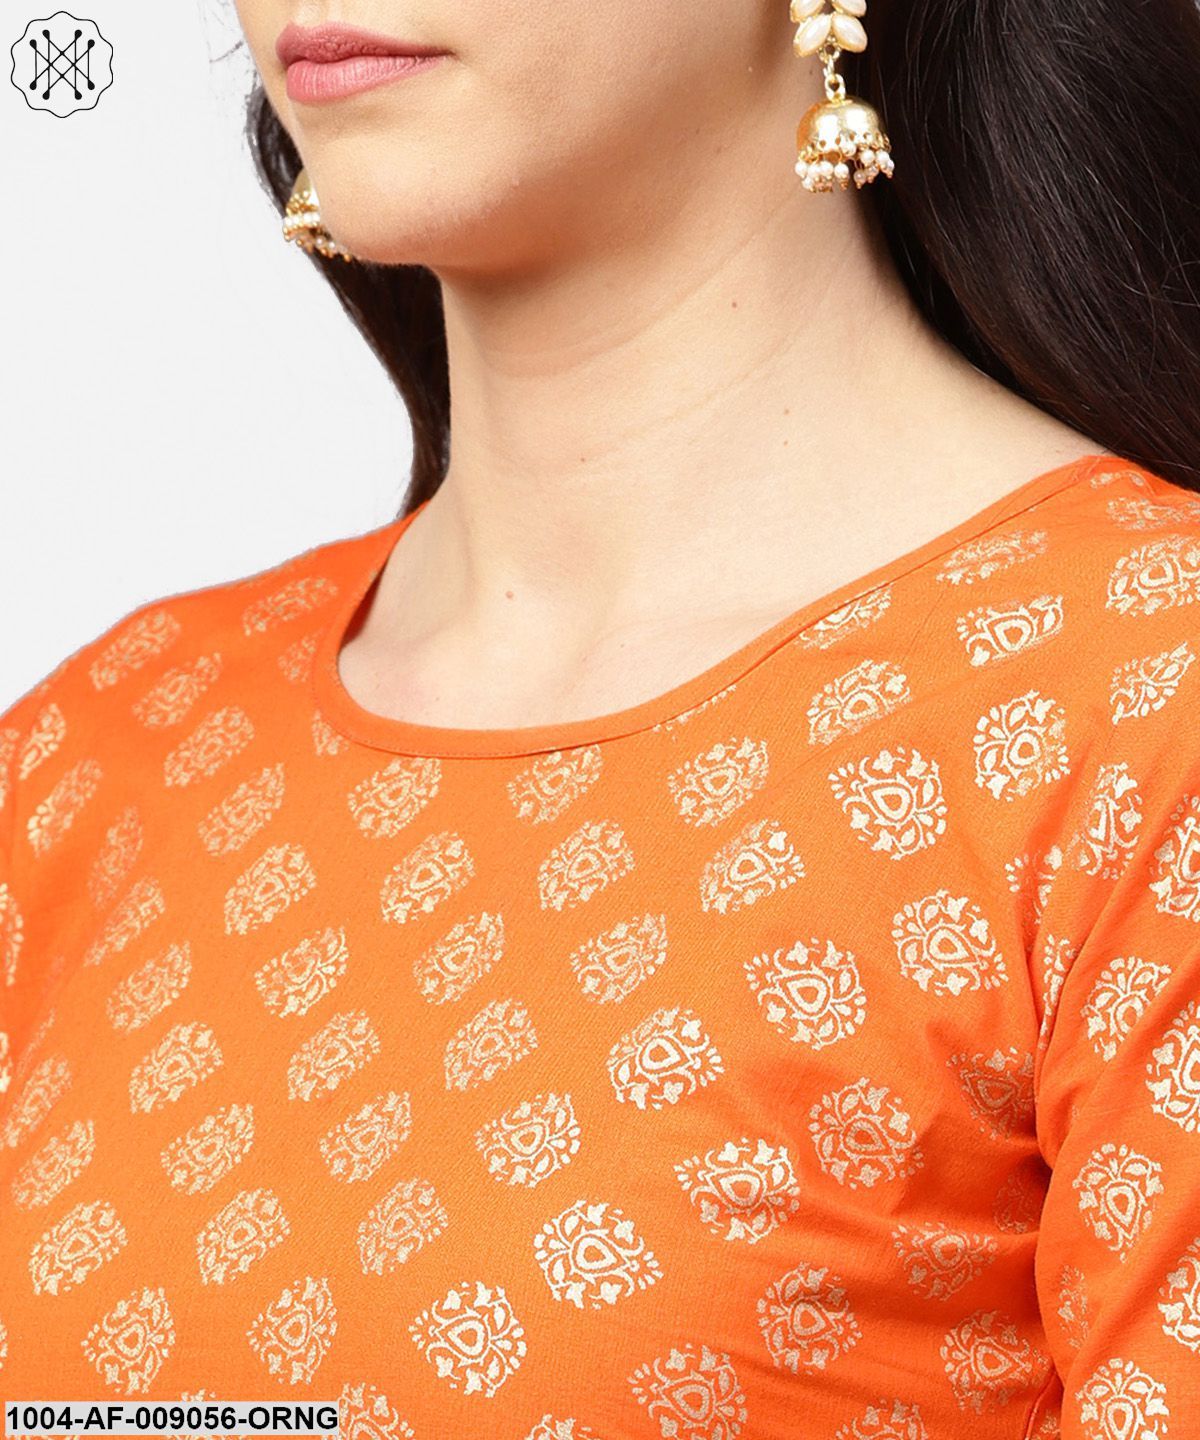 Orange Printed 3/4Th Sleeve Cotton Kurta With Blue Printed Flared Ankle Length Skirt